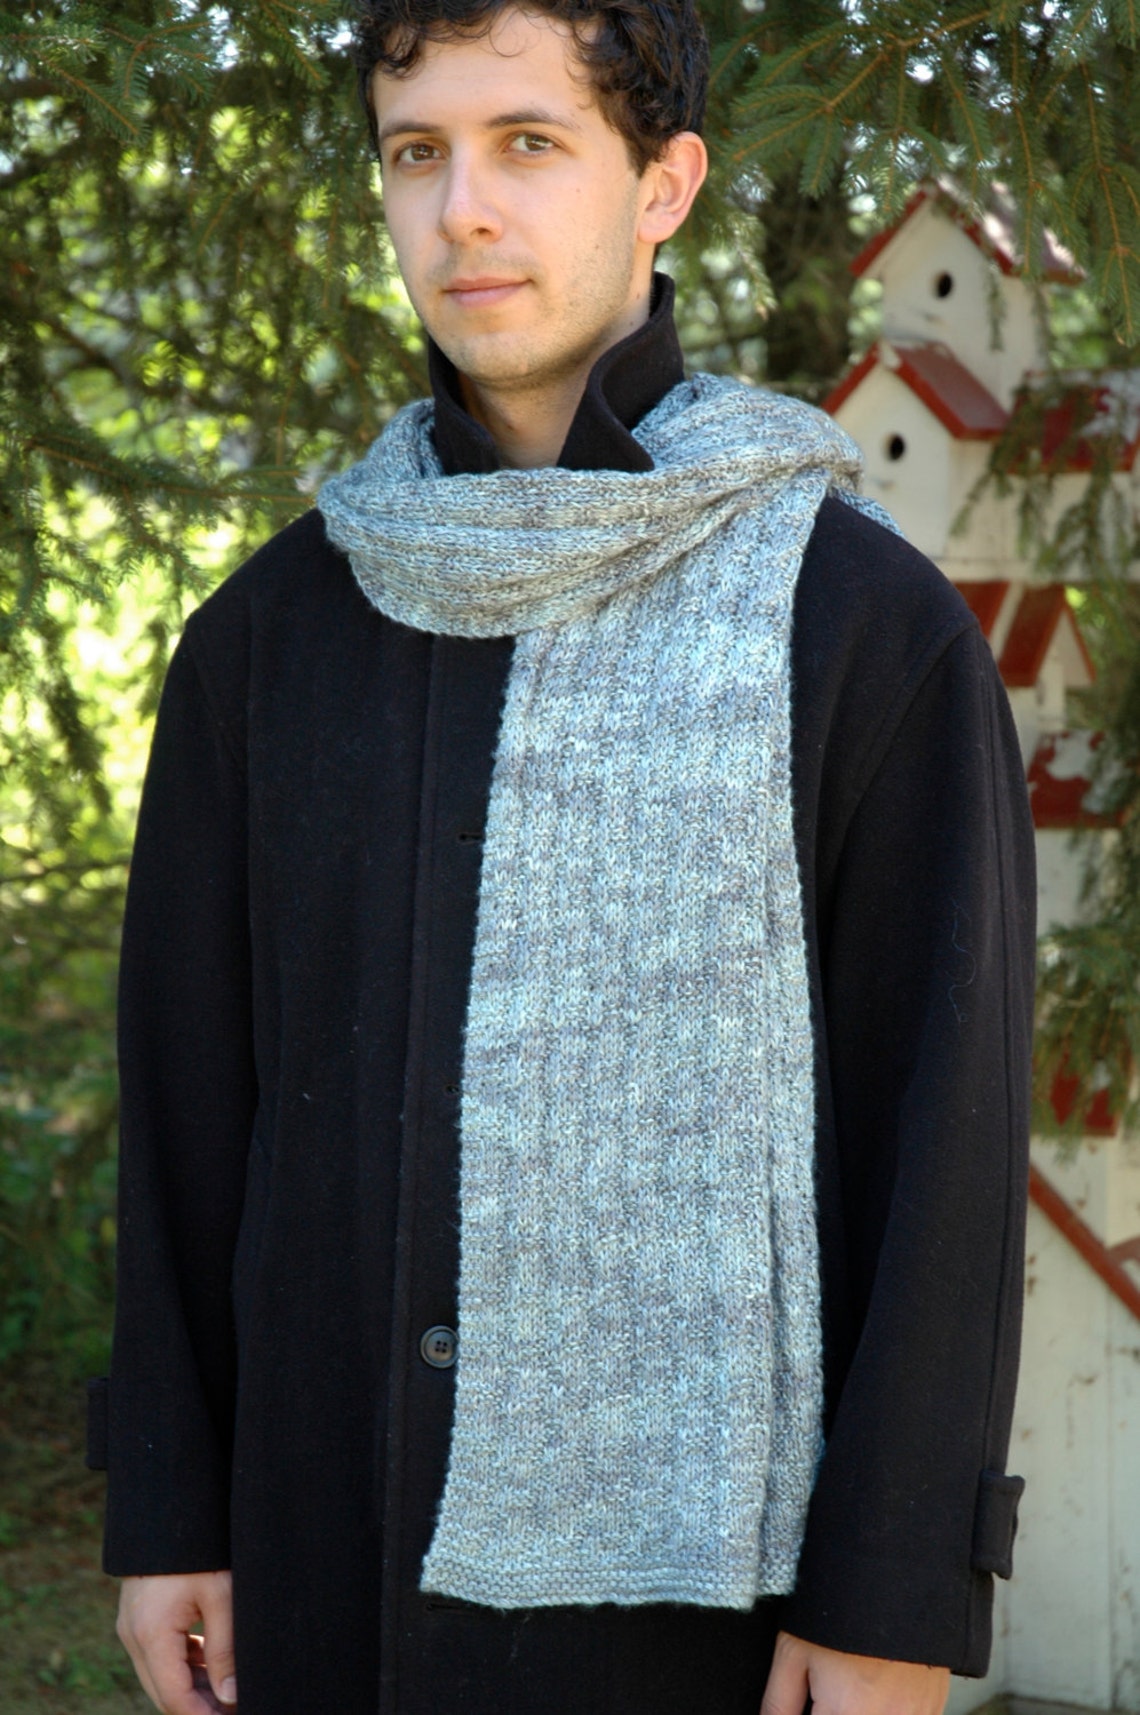 Wills Scarves an Ebook of 3 Knitting Patterns in One - Etsy